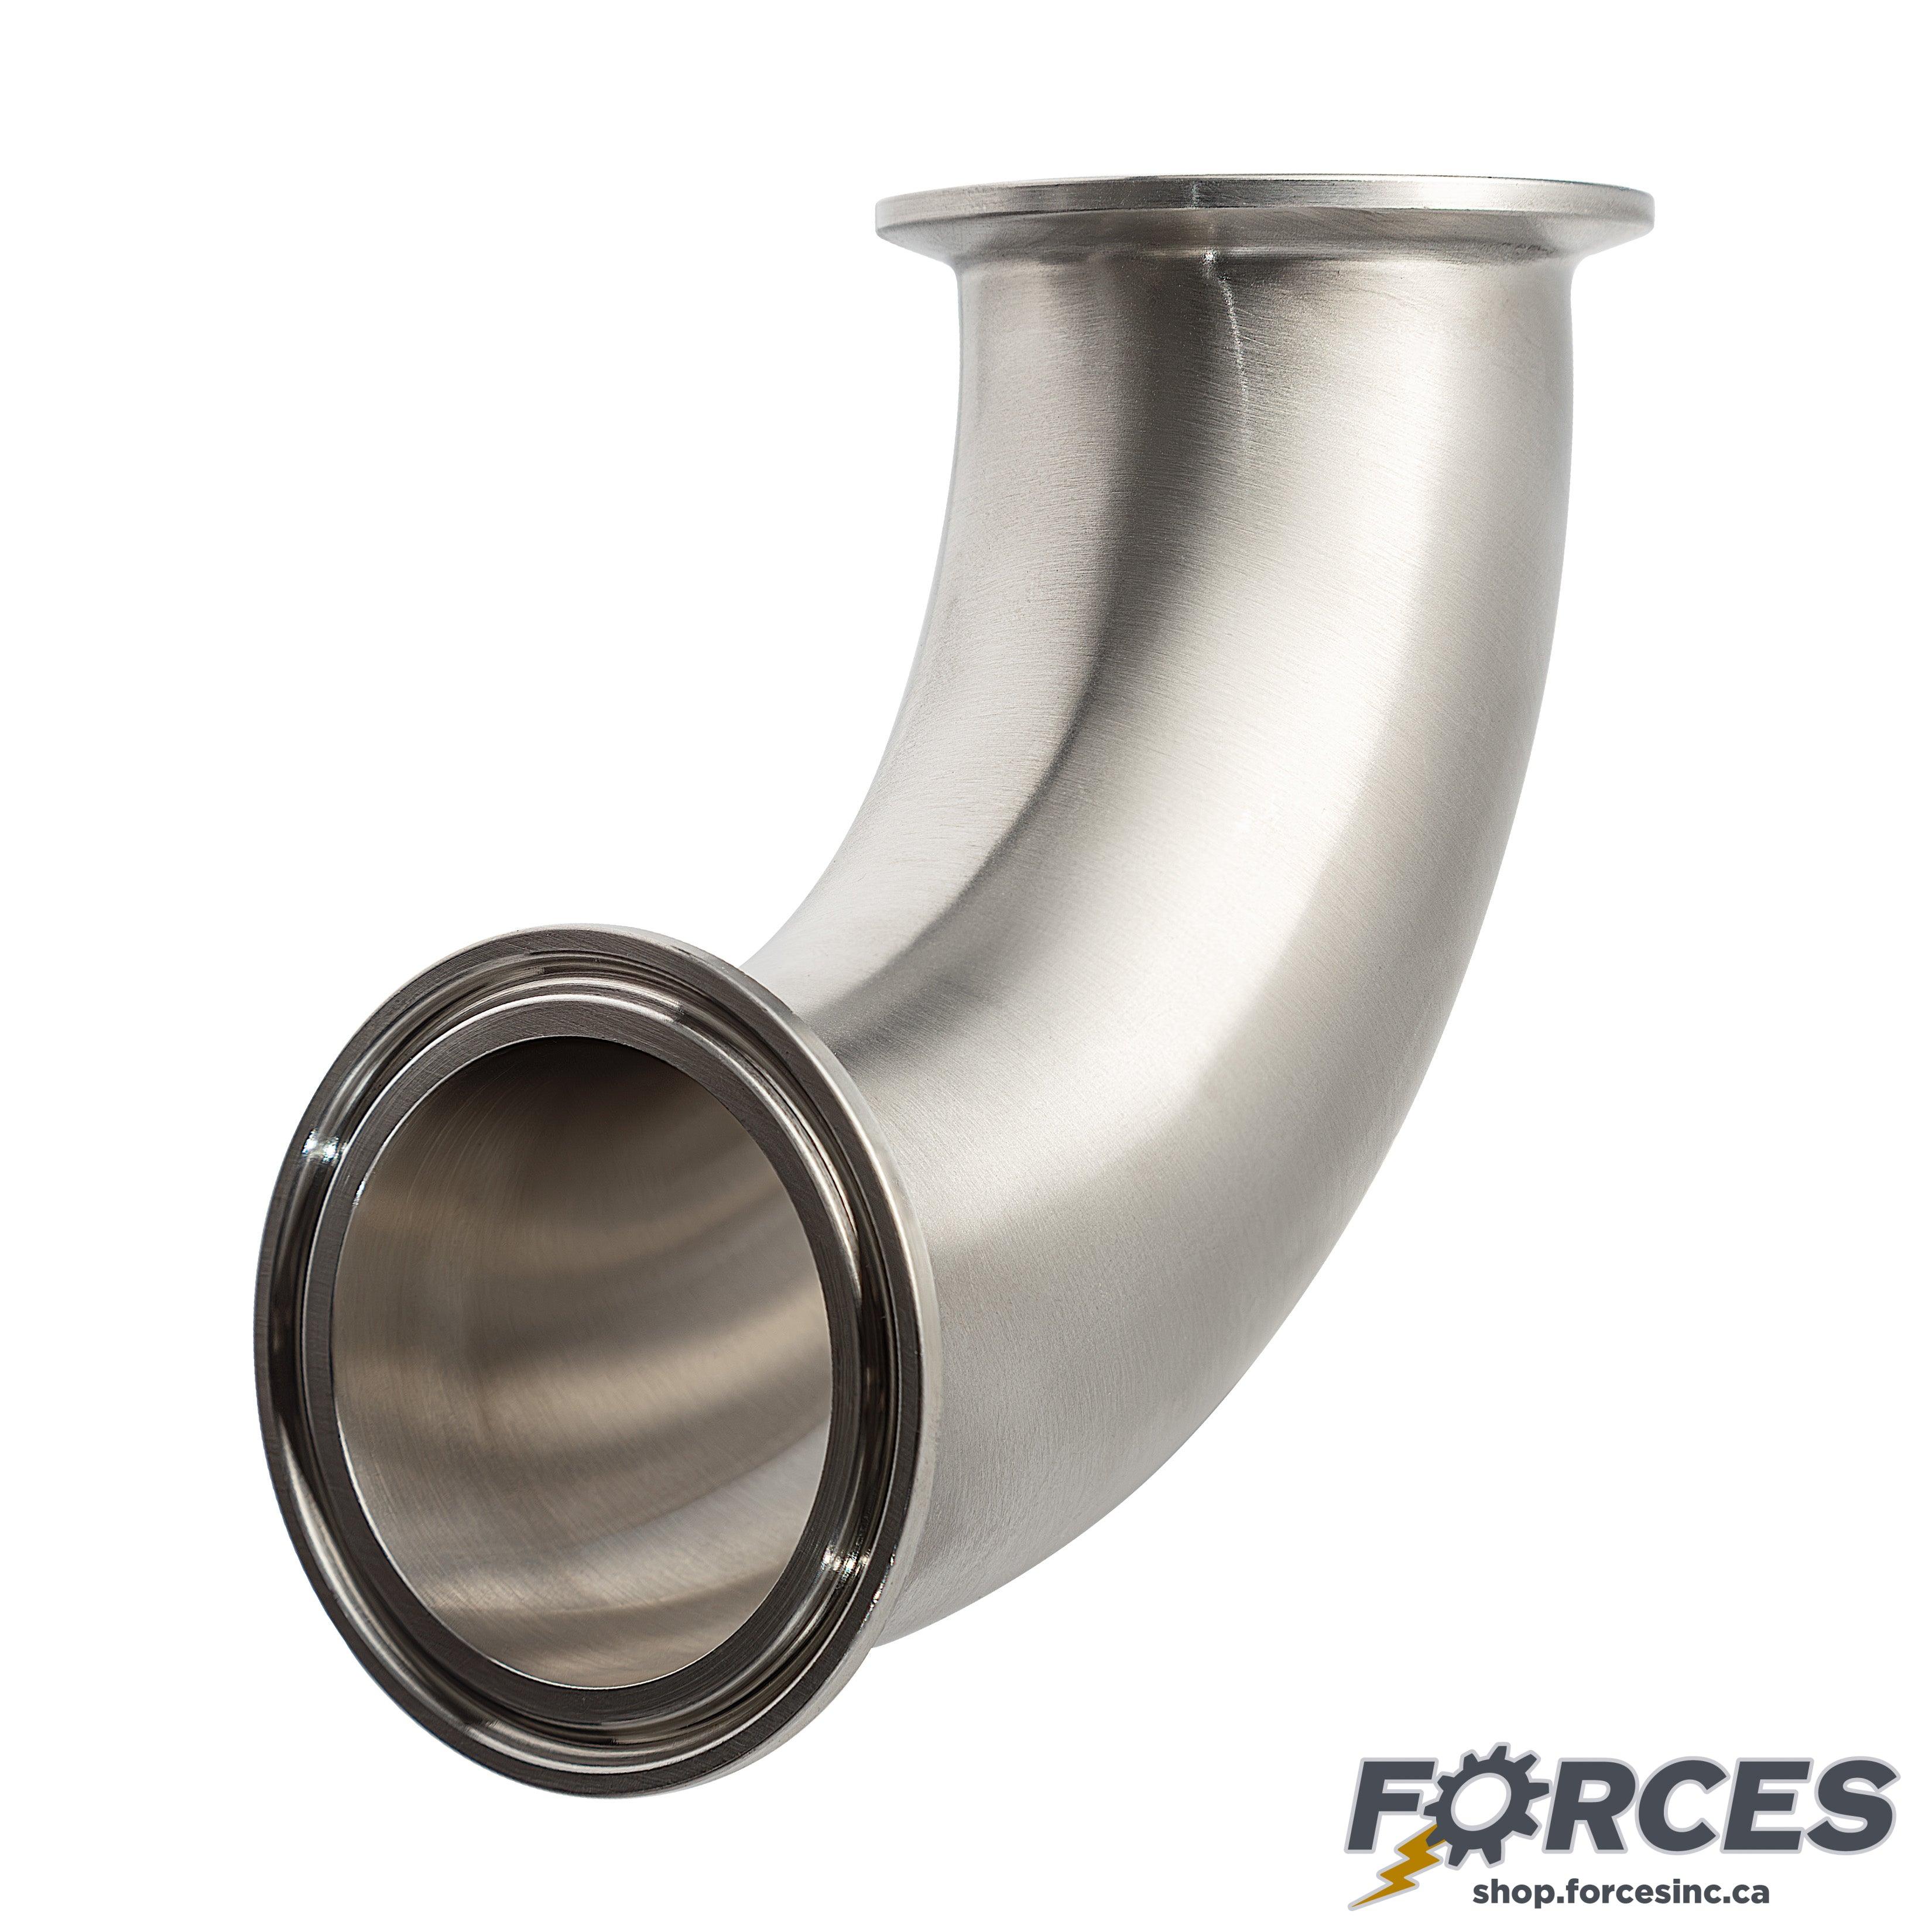 2" Tri-Clamp 90° Elbow - Stainless Steel 316 - Forces Inc